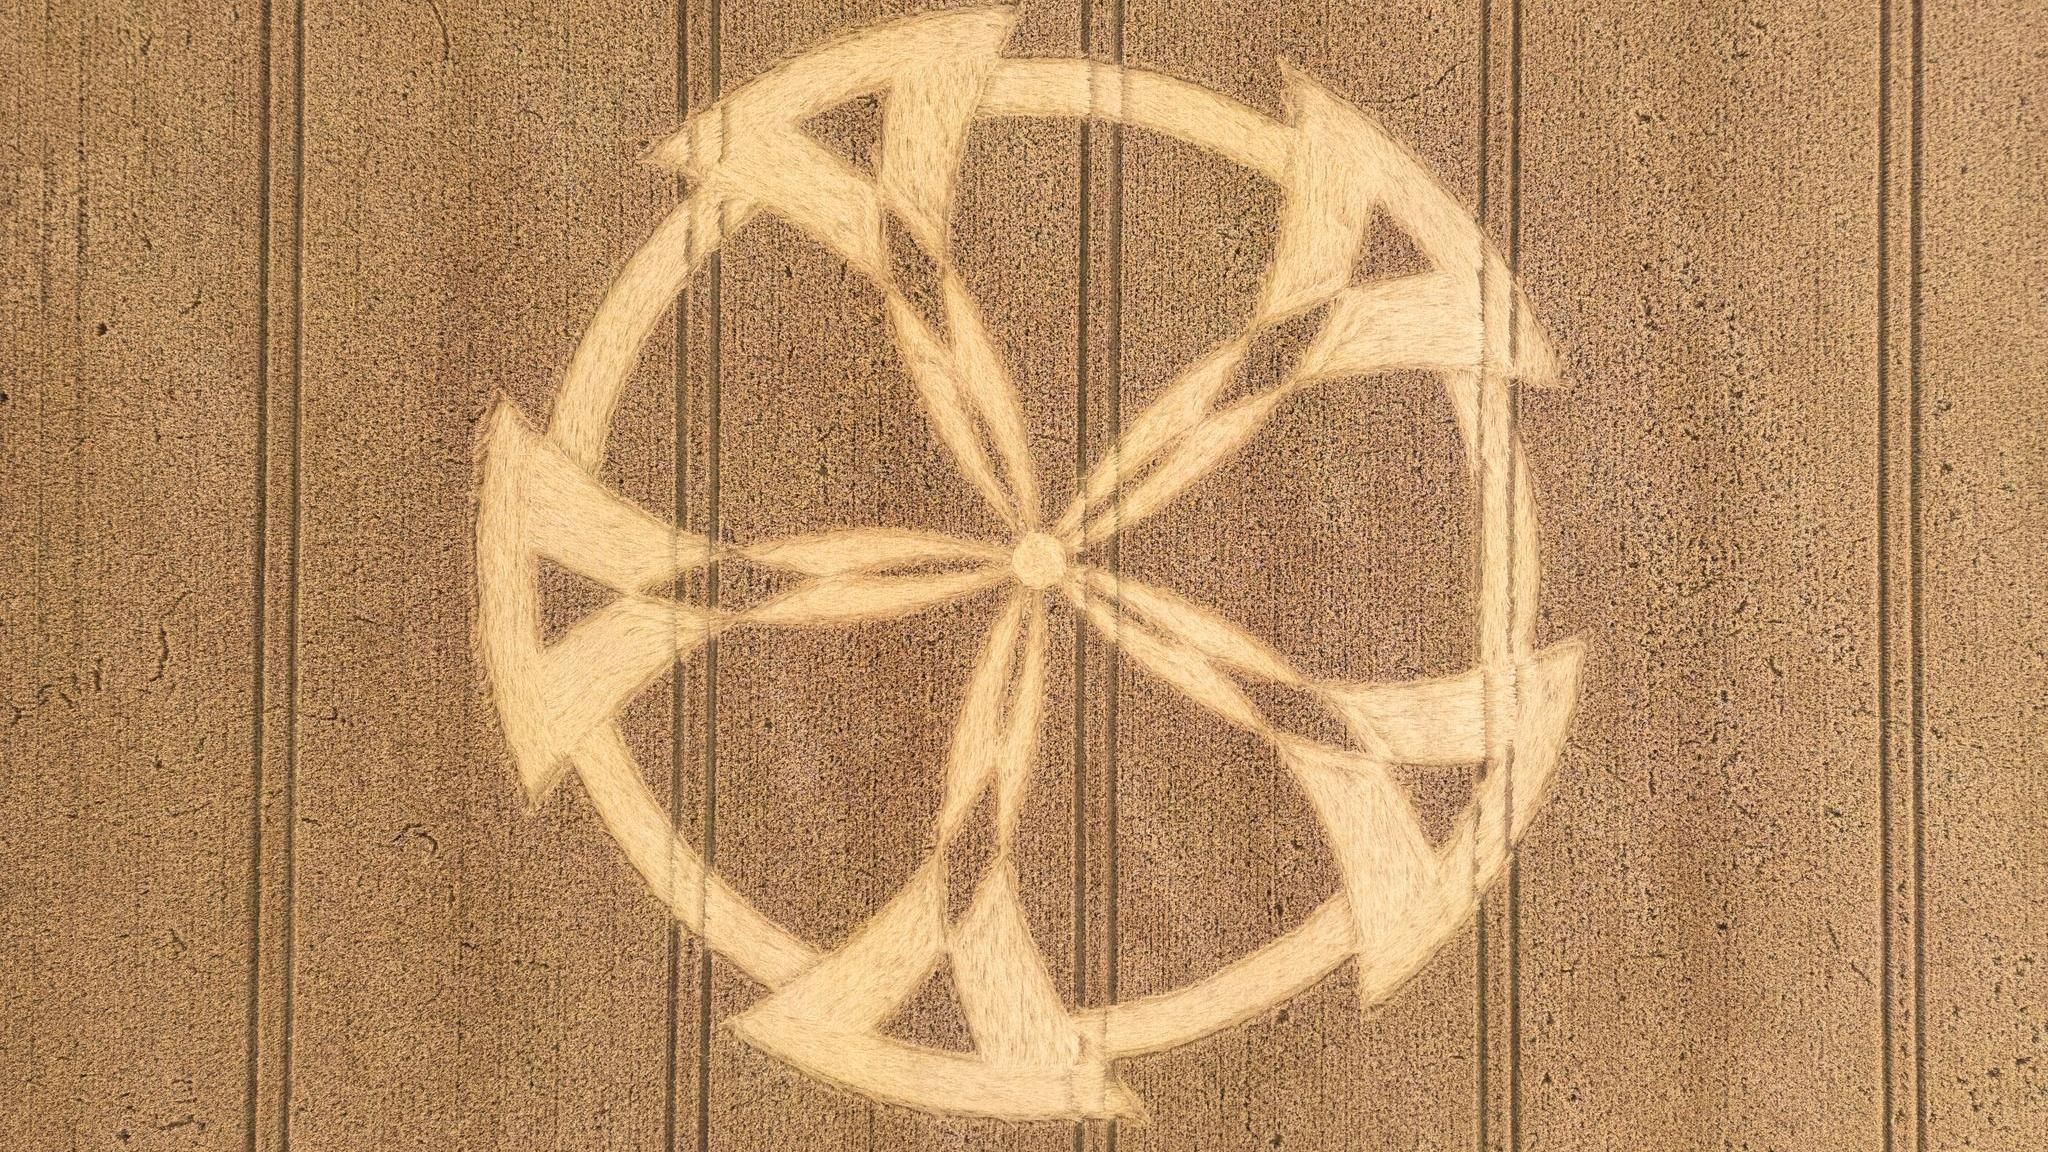 View of the crop circle from above